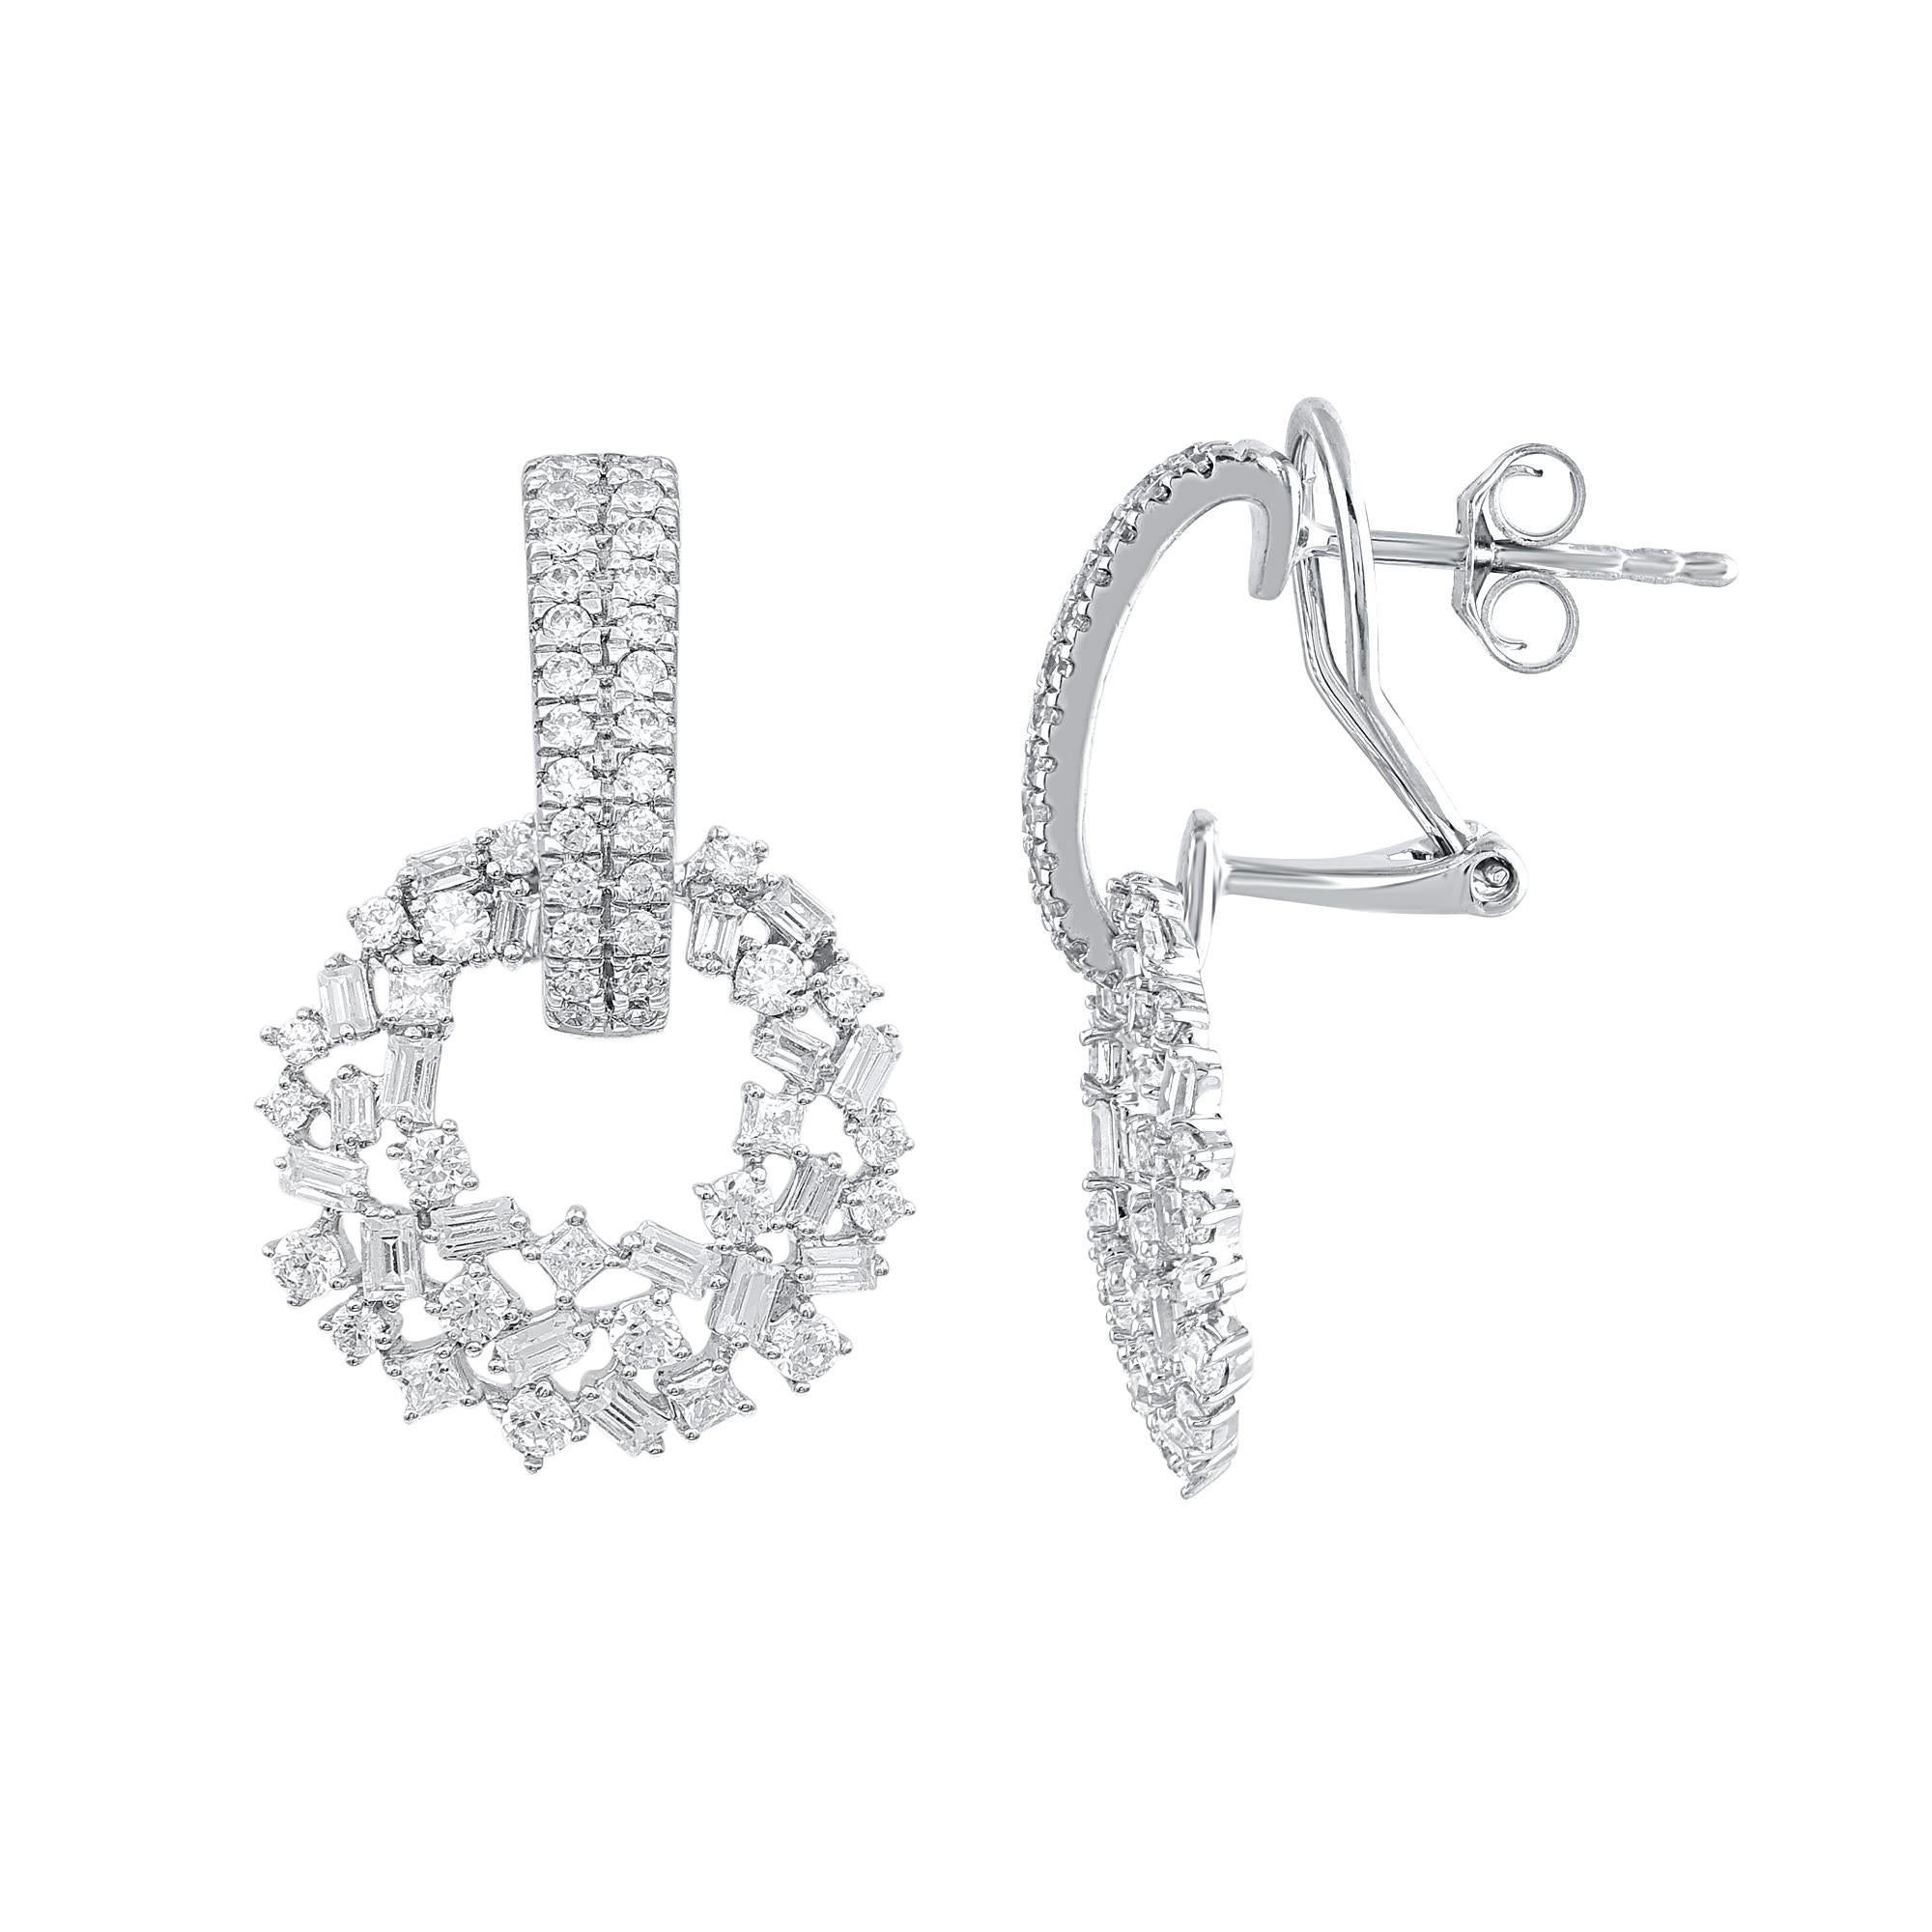 The perfect complement to her classic style, this diamond dangle earrings shines with your happily ever after. These earrings studded with 134 round, princess and baguette cut diamond in prong setting. Total diamond weight is 1.50 carat. These